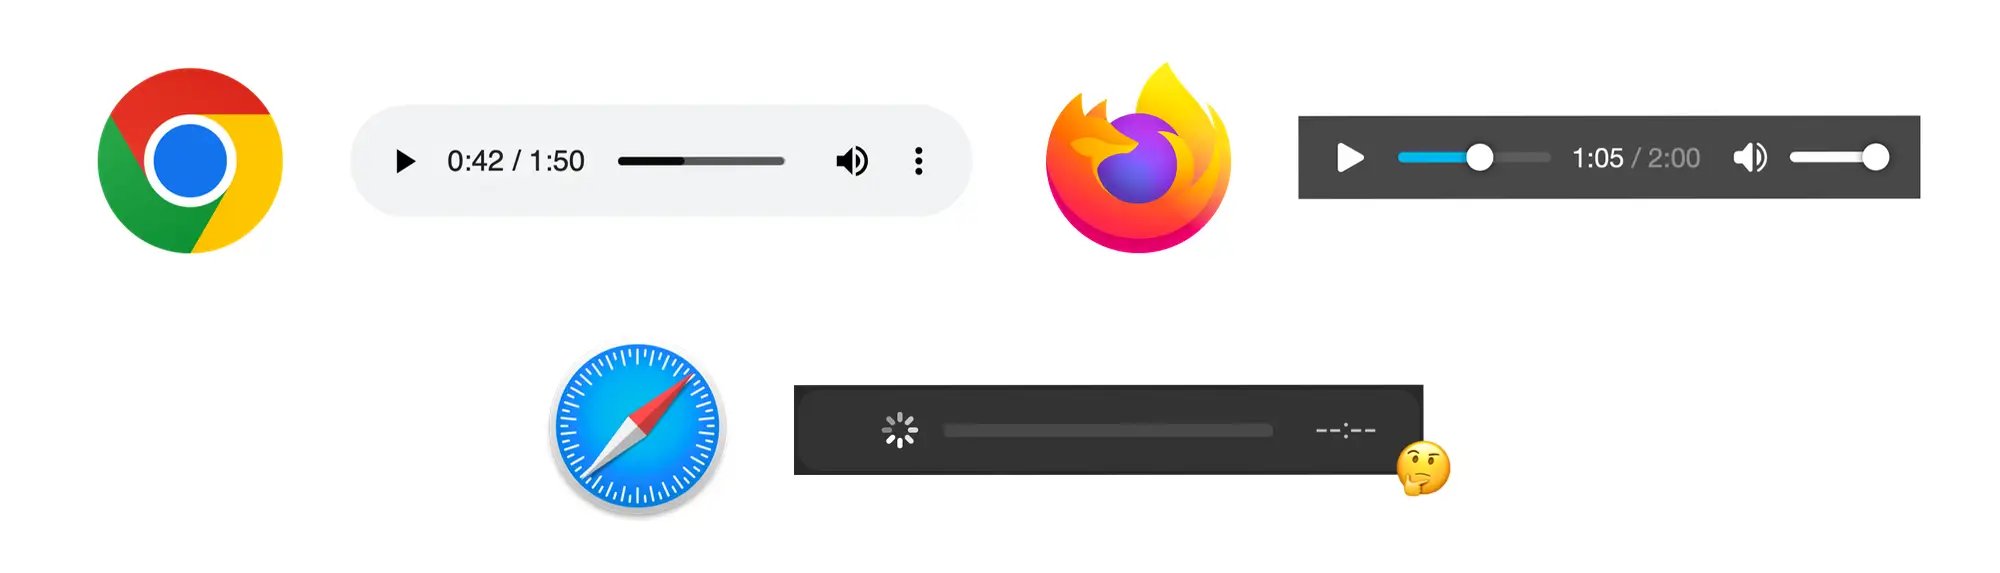 Image showing system audio players in Chrome, Firefox, and Safari. Safari’s audio player appears to be broken.